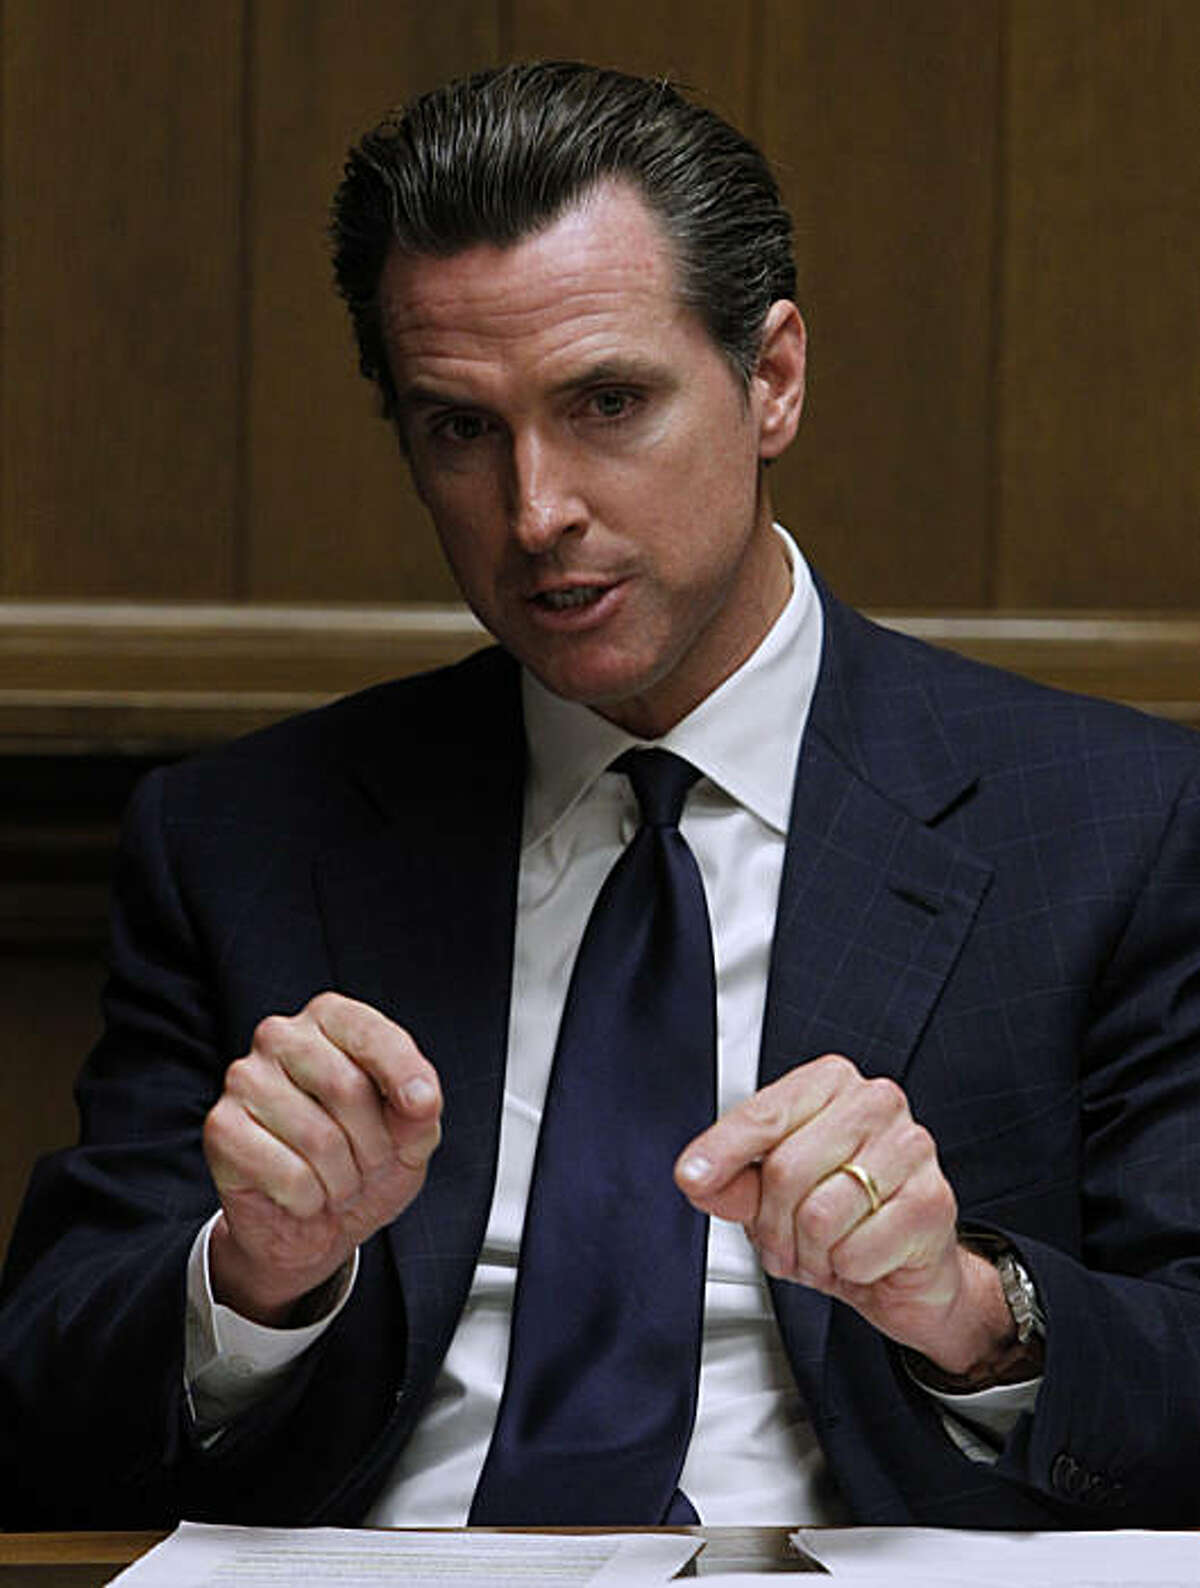 Mayor Gavin Newsom meets with the Chronicle Editorial Board in San Francisco, Calif., on Wednesday, Dec. 22, 2010. Newsom will step down as mayor in January when he begins a new chapter in his political career as California's Lieutenant Governor.